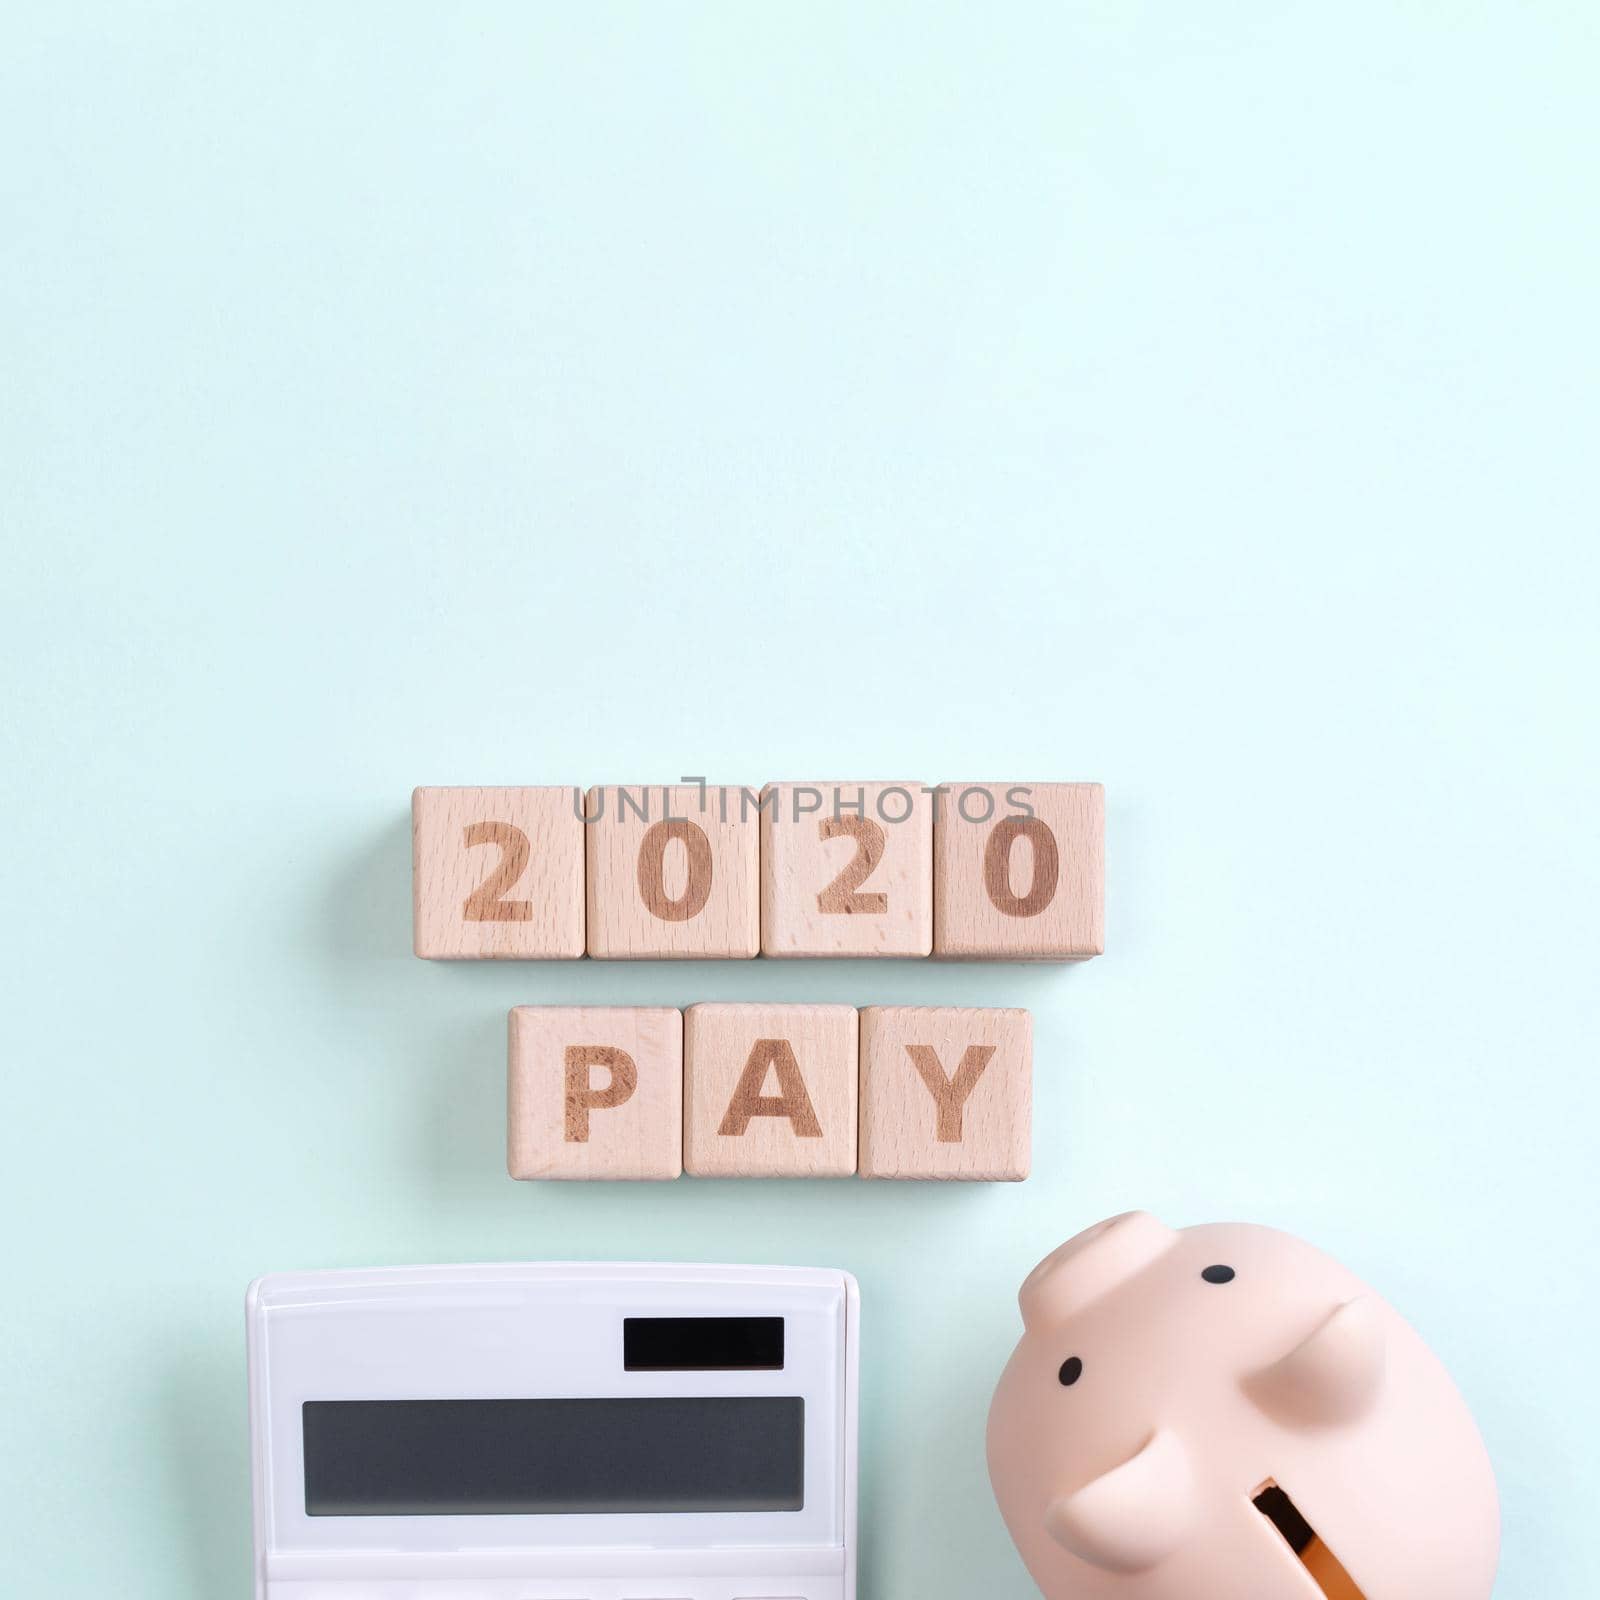 2020 goal, finance plan abstract design concept, wood blocks on green table background with piggy bank and calculator, top view, flat lay, copy space.